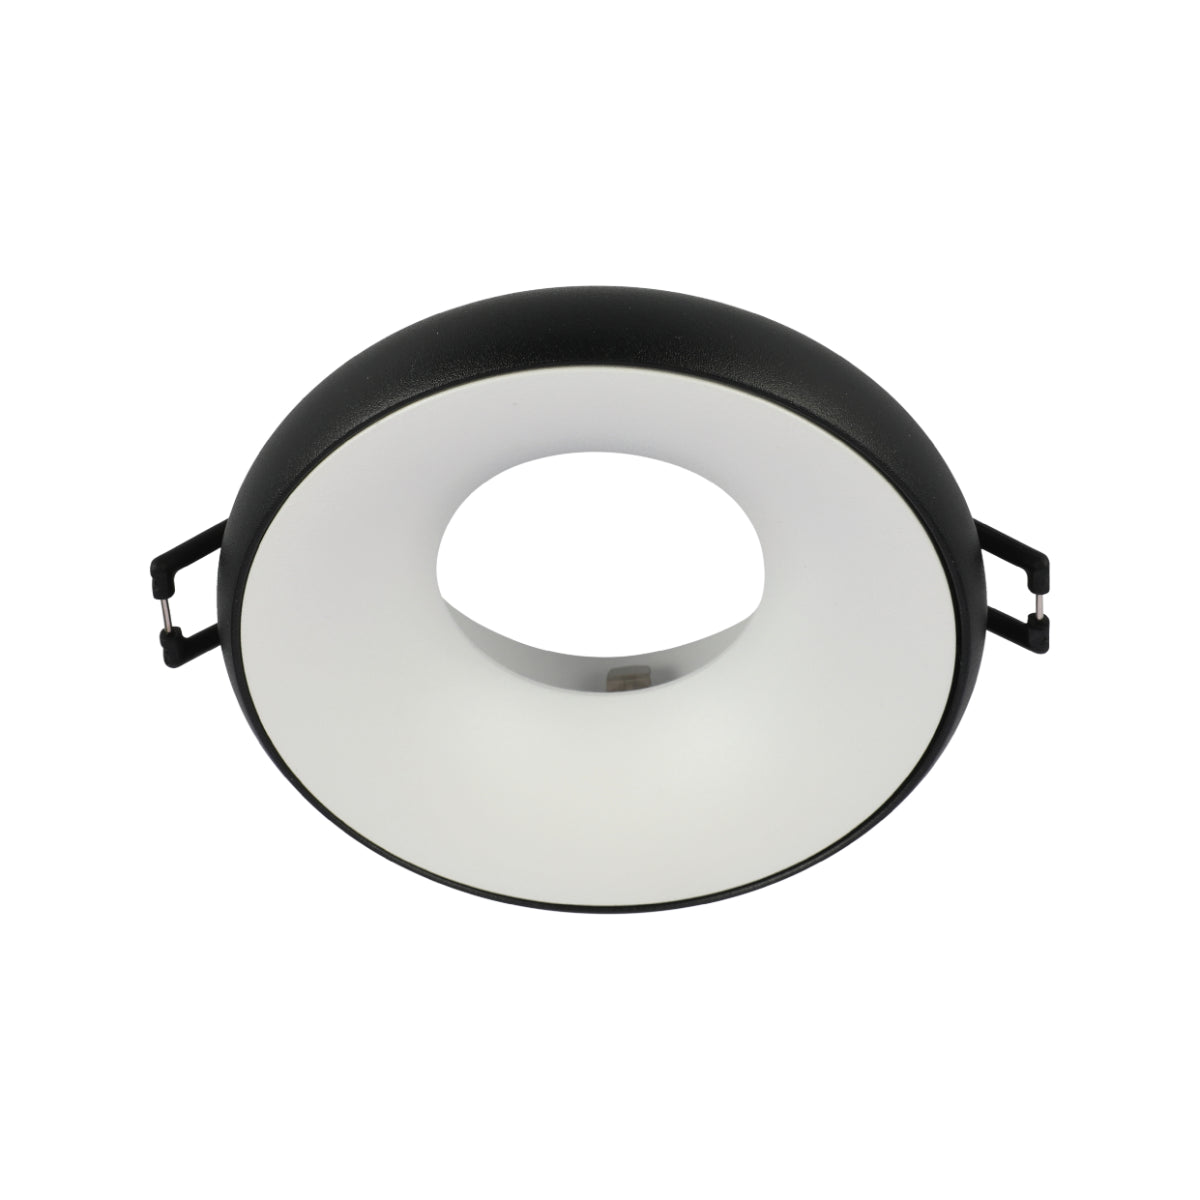 Main image of Die-Cast Aluminium Fixed GU10 Downlight with Color-Accented Bezel 143-04036